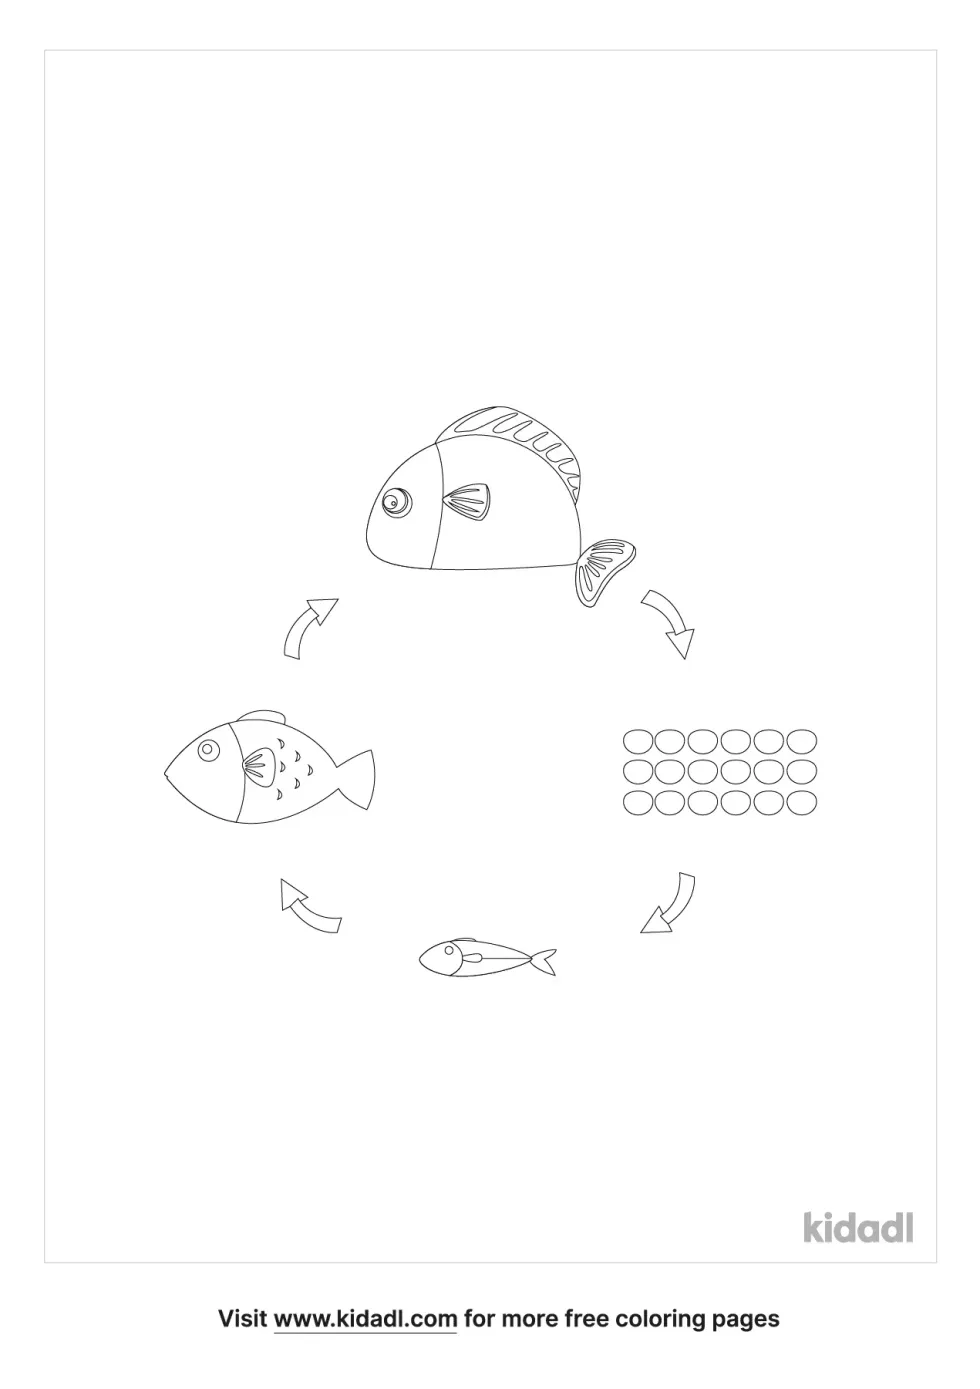 Simple Life Coloring Page